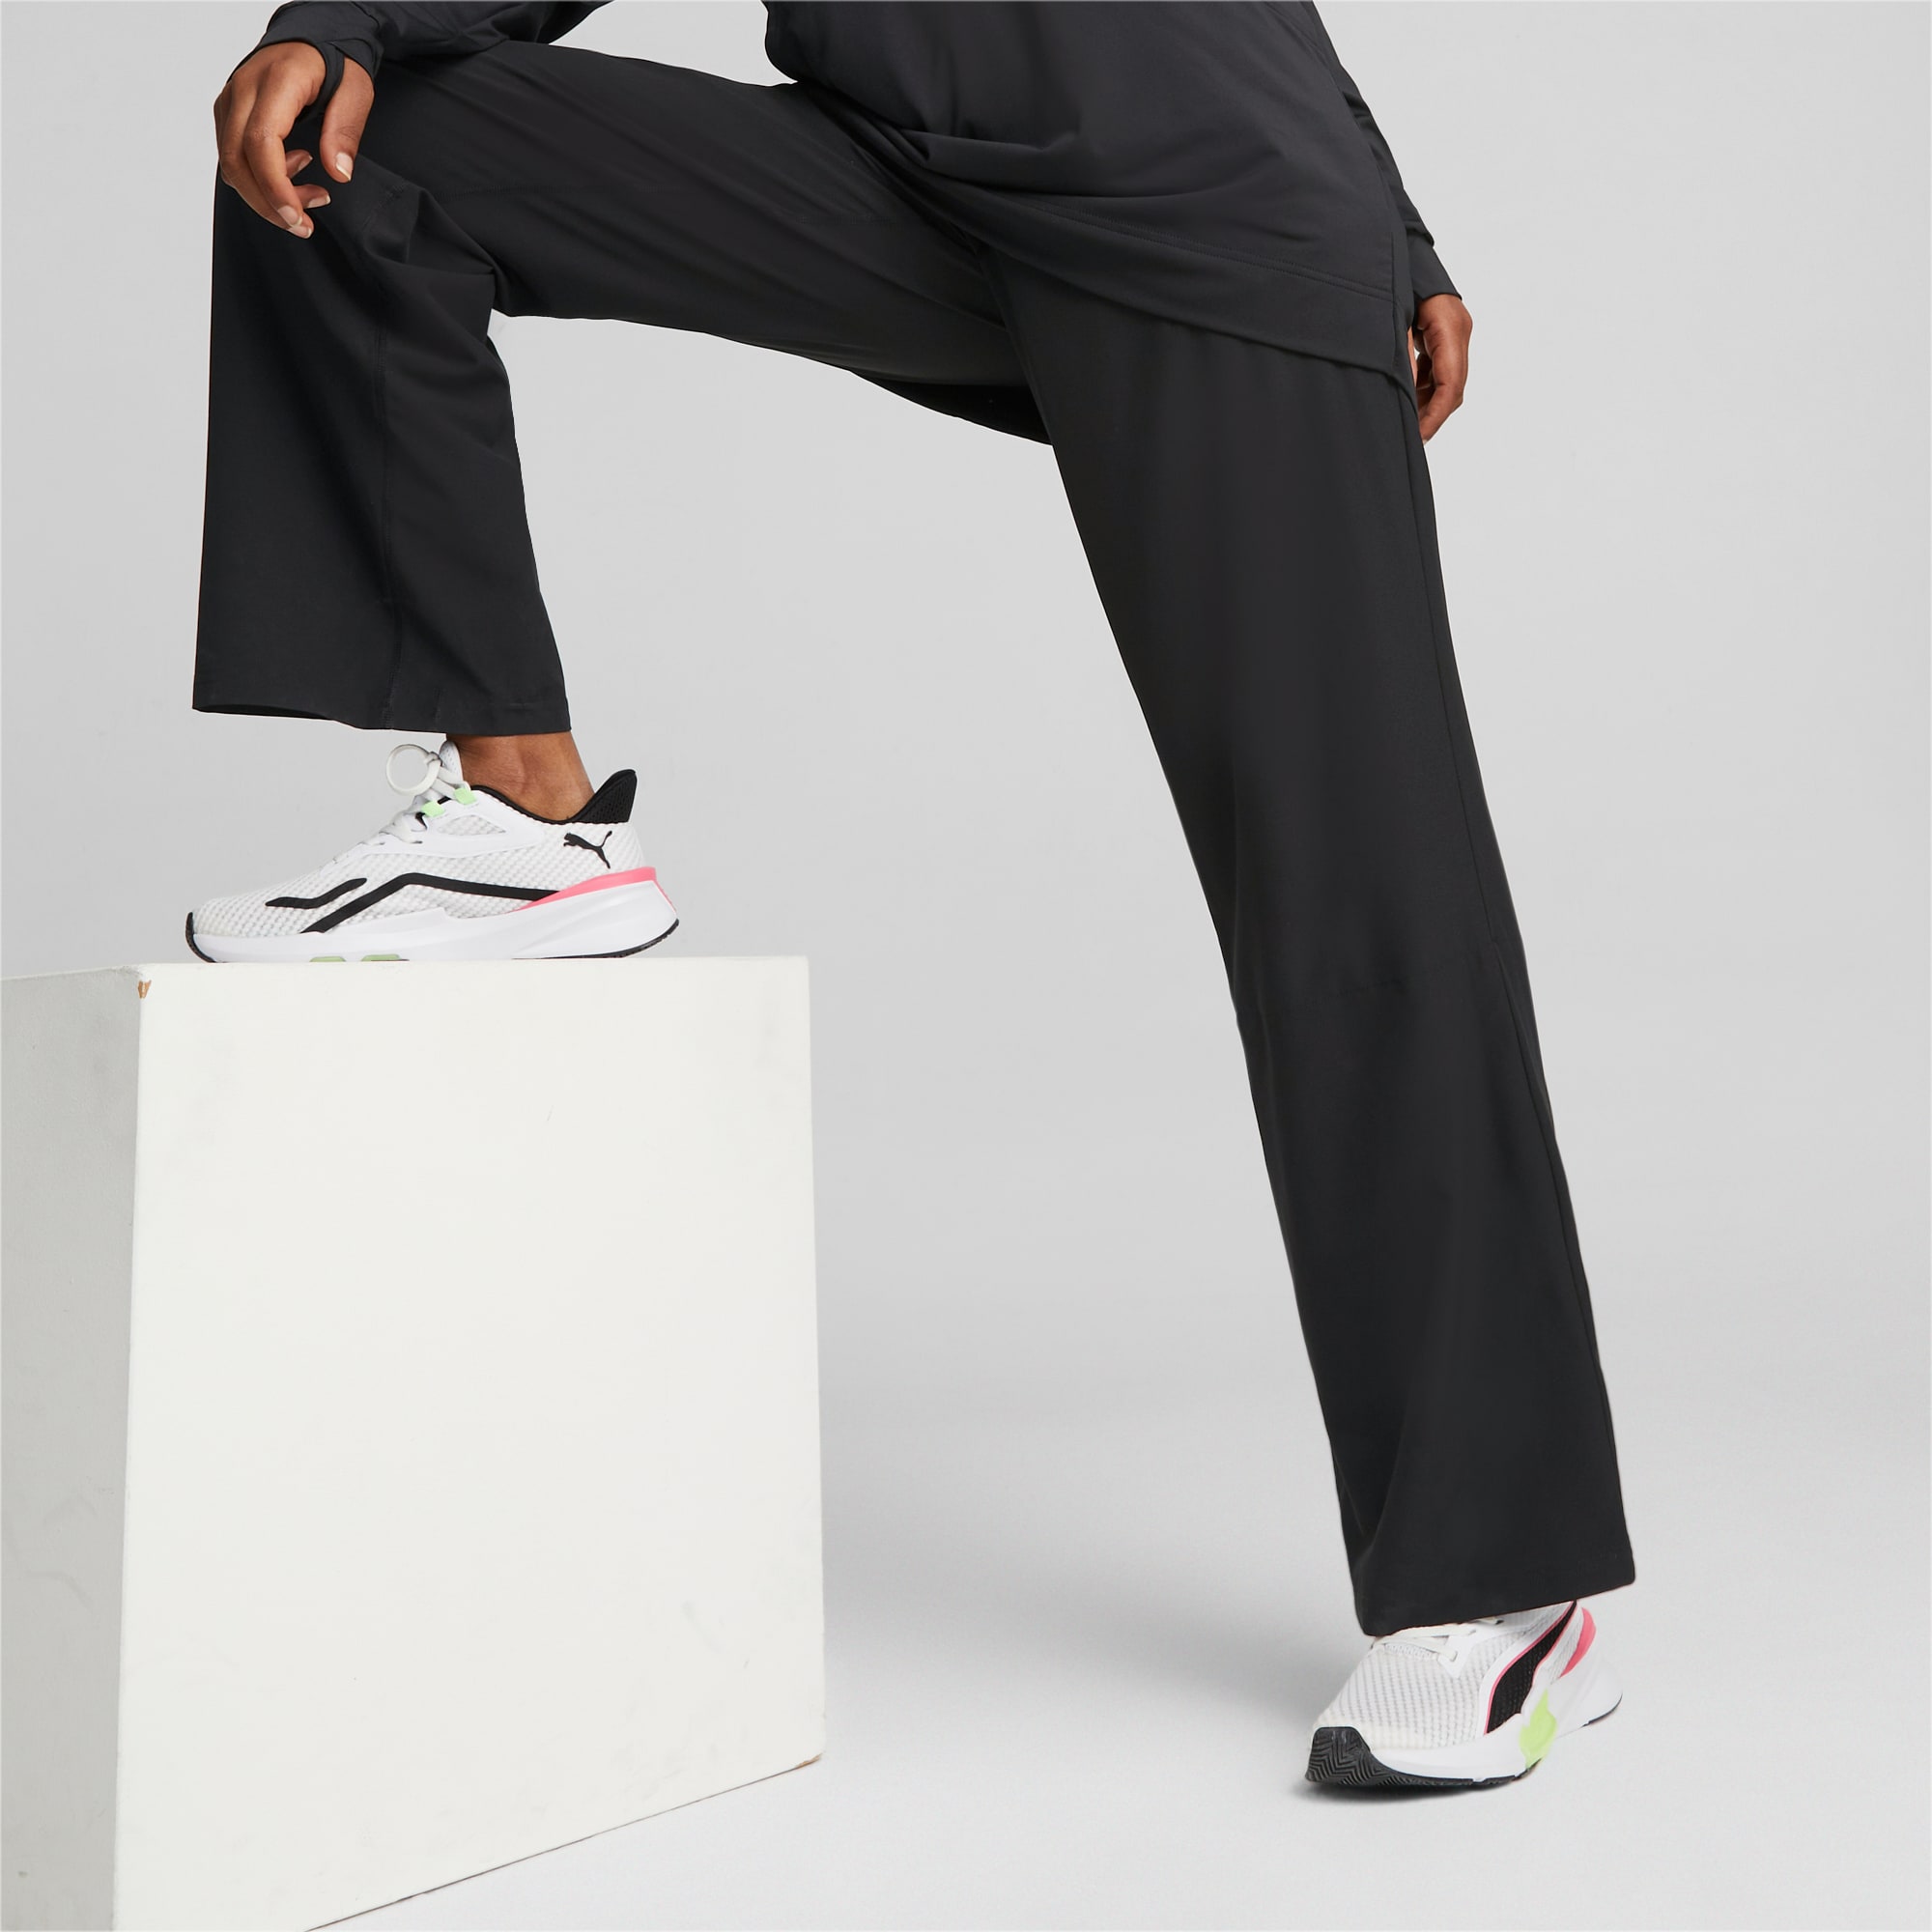 Nike Wide Leg Workout Clothes: Women's Activewear & Athletic Wear